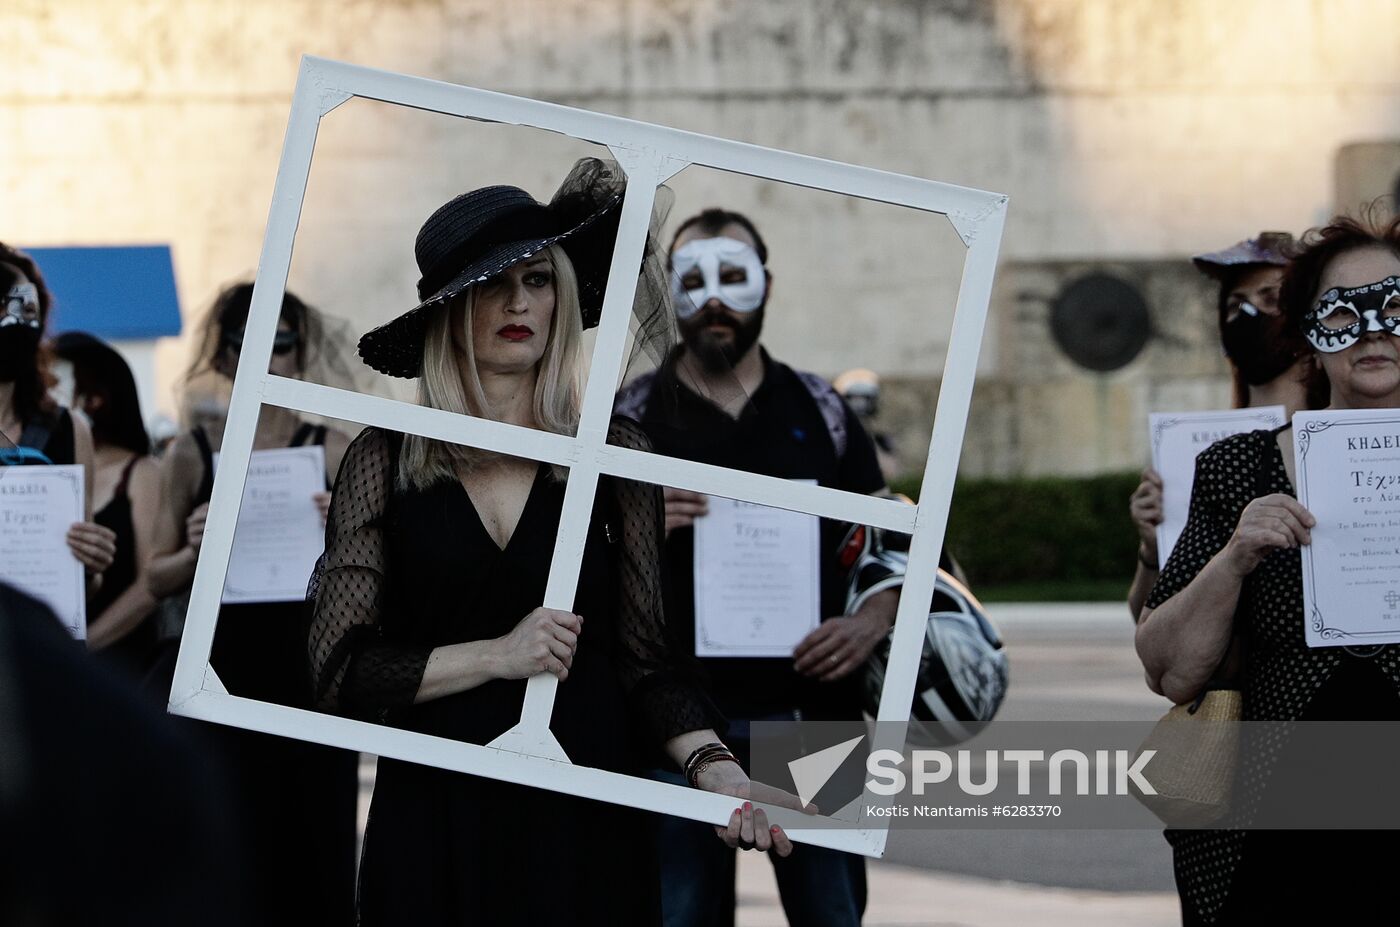 Greece Protests